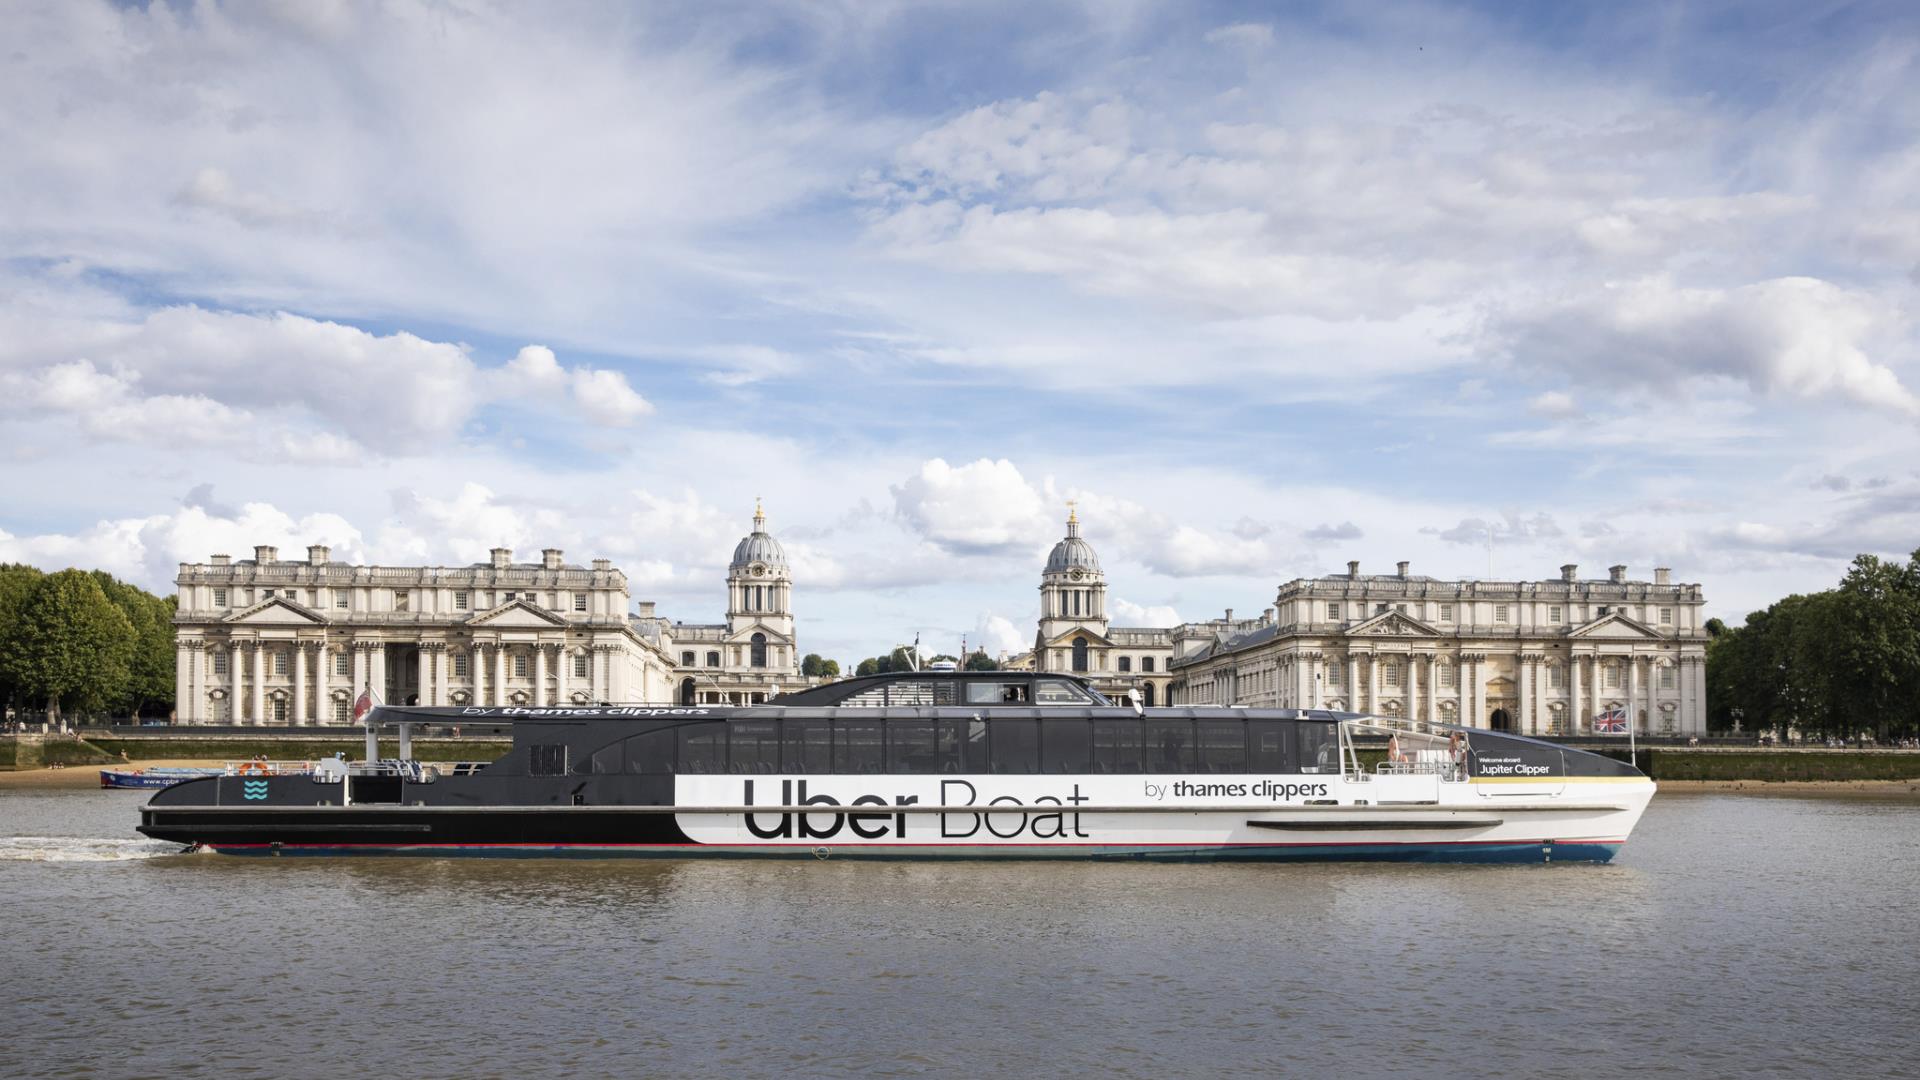 An Uber Boat by Thames Clipper floating past the Old Royal Naval College from the North Bank of the River Thames